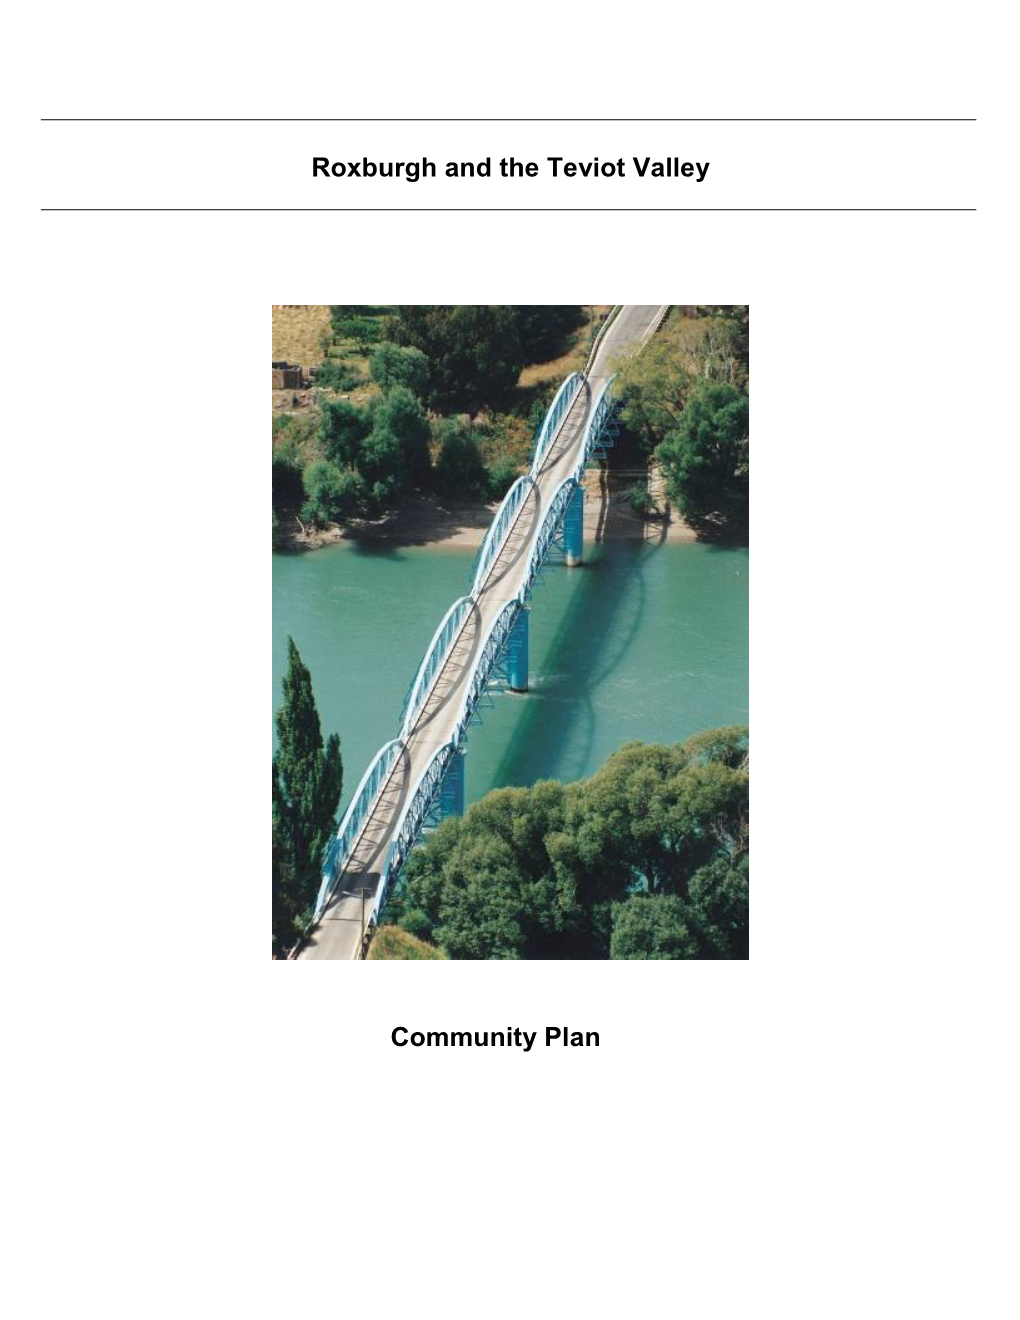 Roxburgh and the Teviot Valley Community Plan